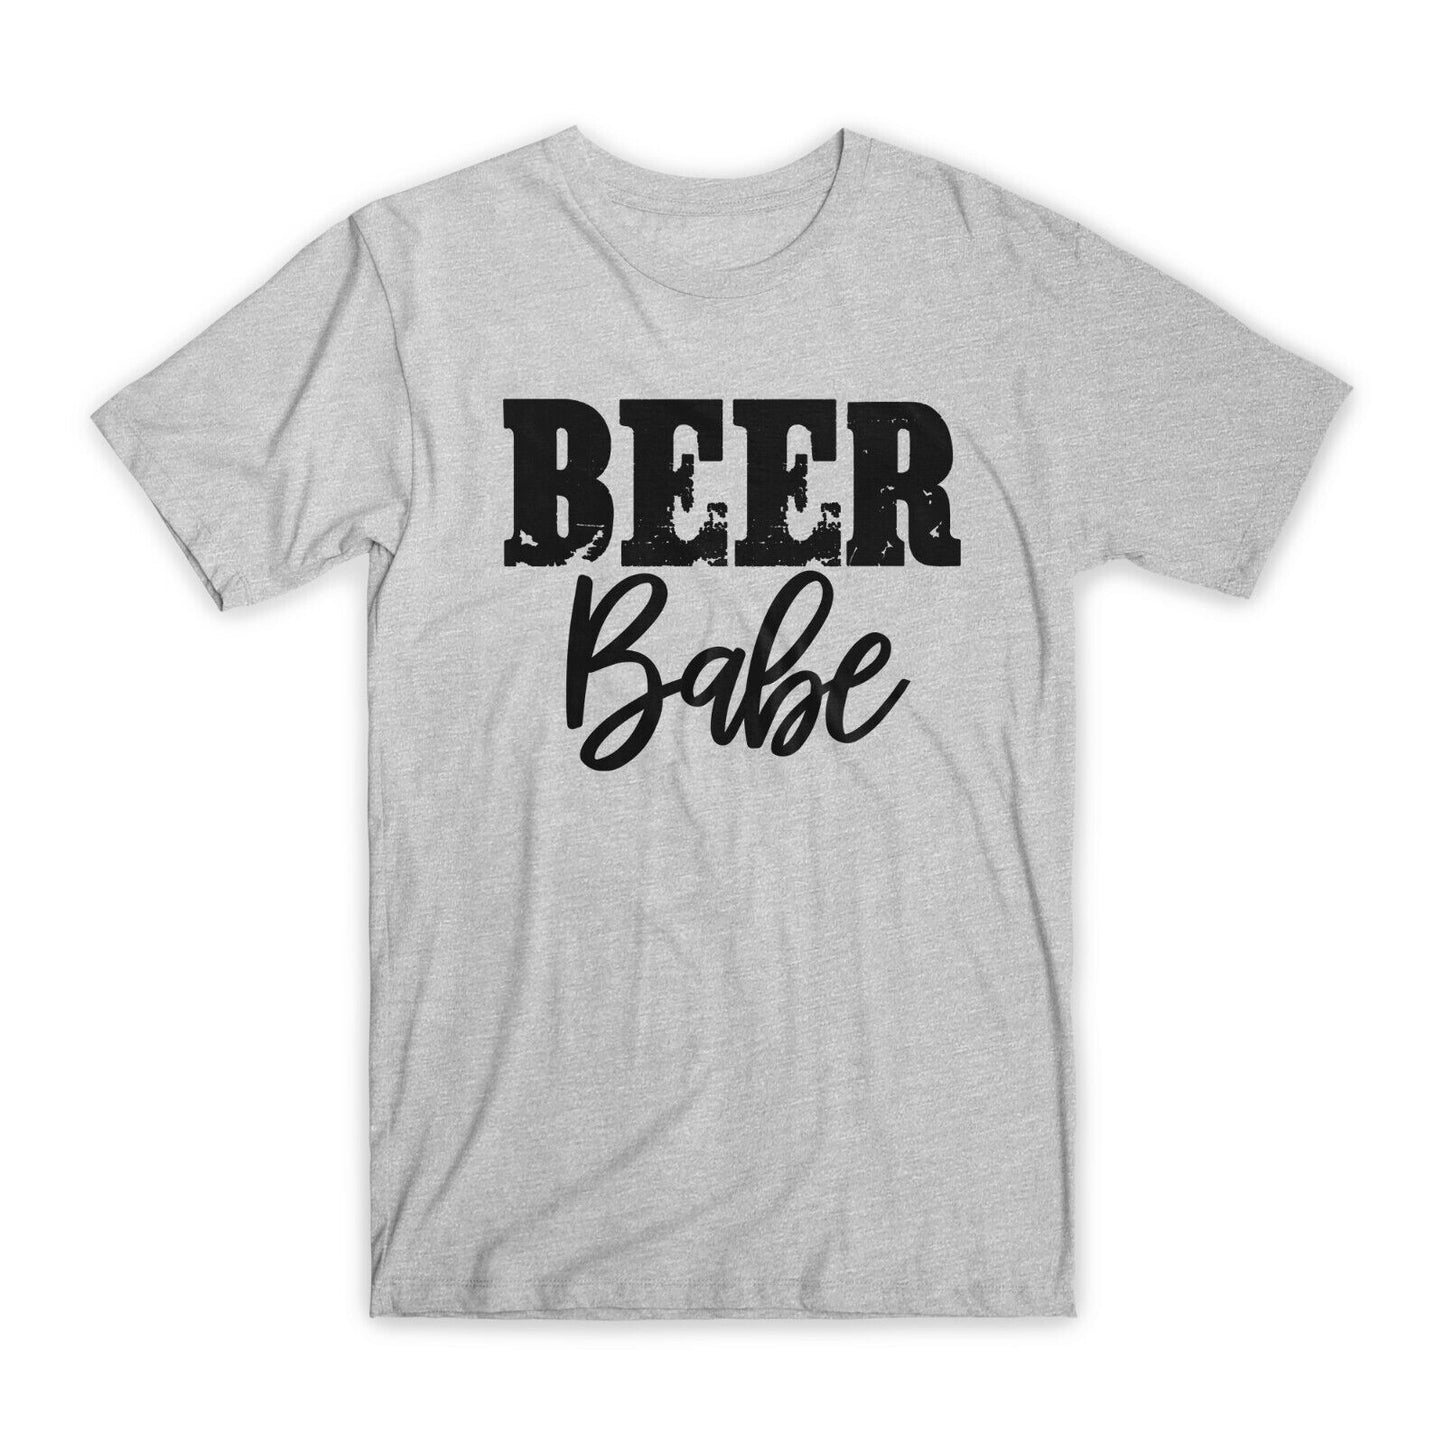 Beer Babe Print T-Shirt Premium Soft Cotton Crew Neck Funny Tee Novelty Gift NEW